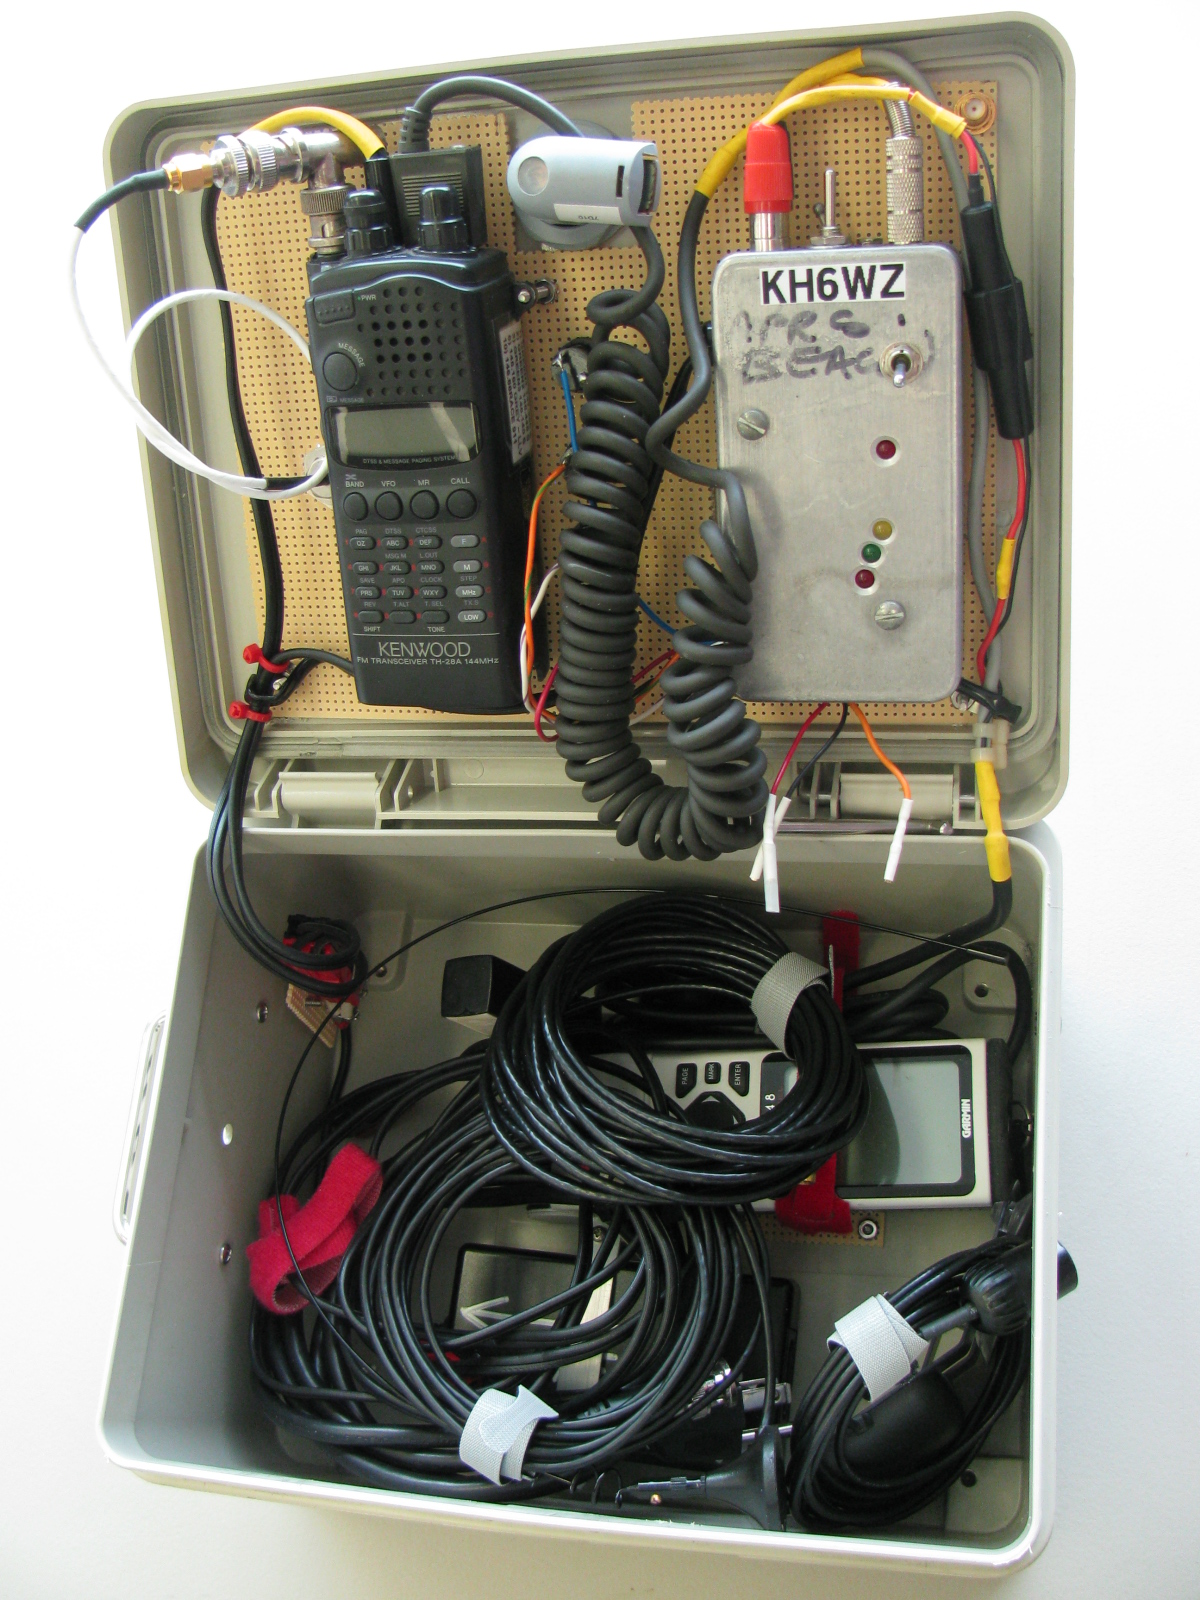 The KH6WZ Automatic Position Reporting System (APRS) Beacons wayneyoshidakh6wz picture